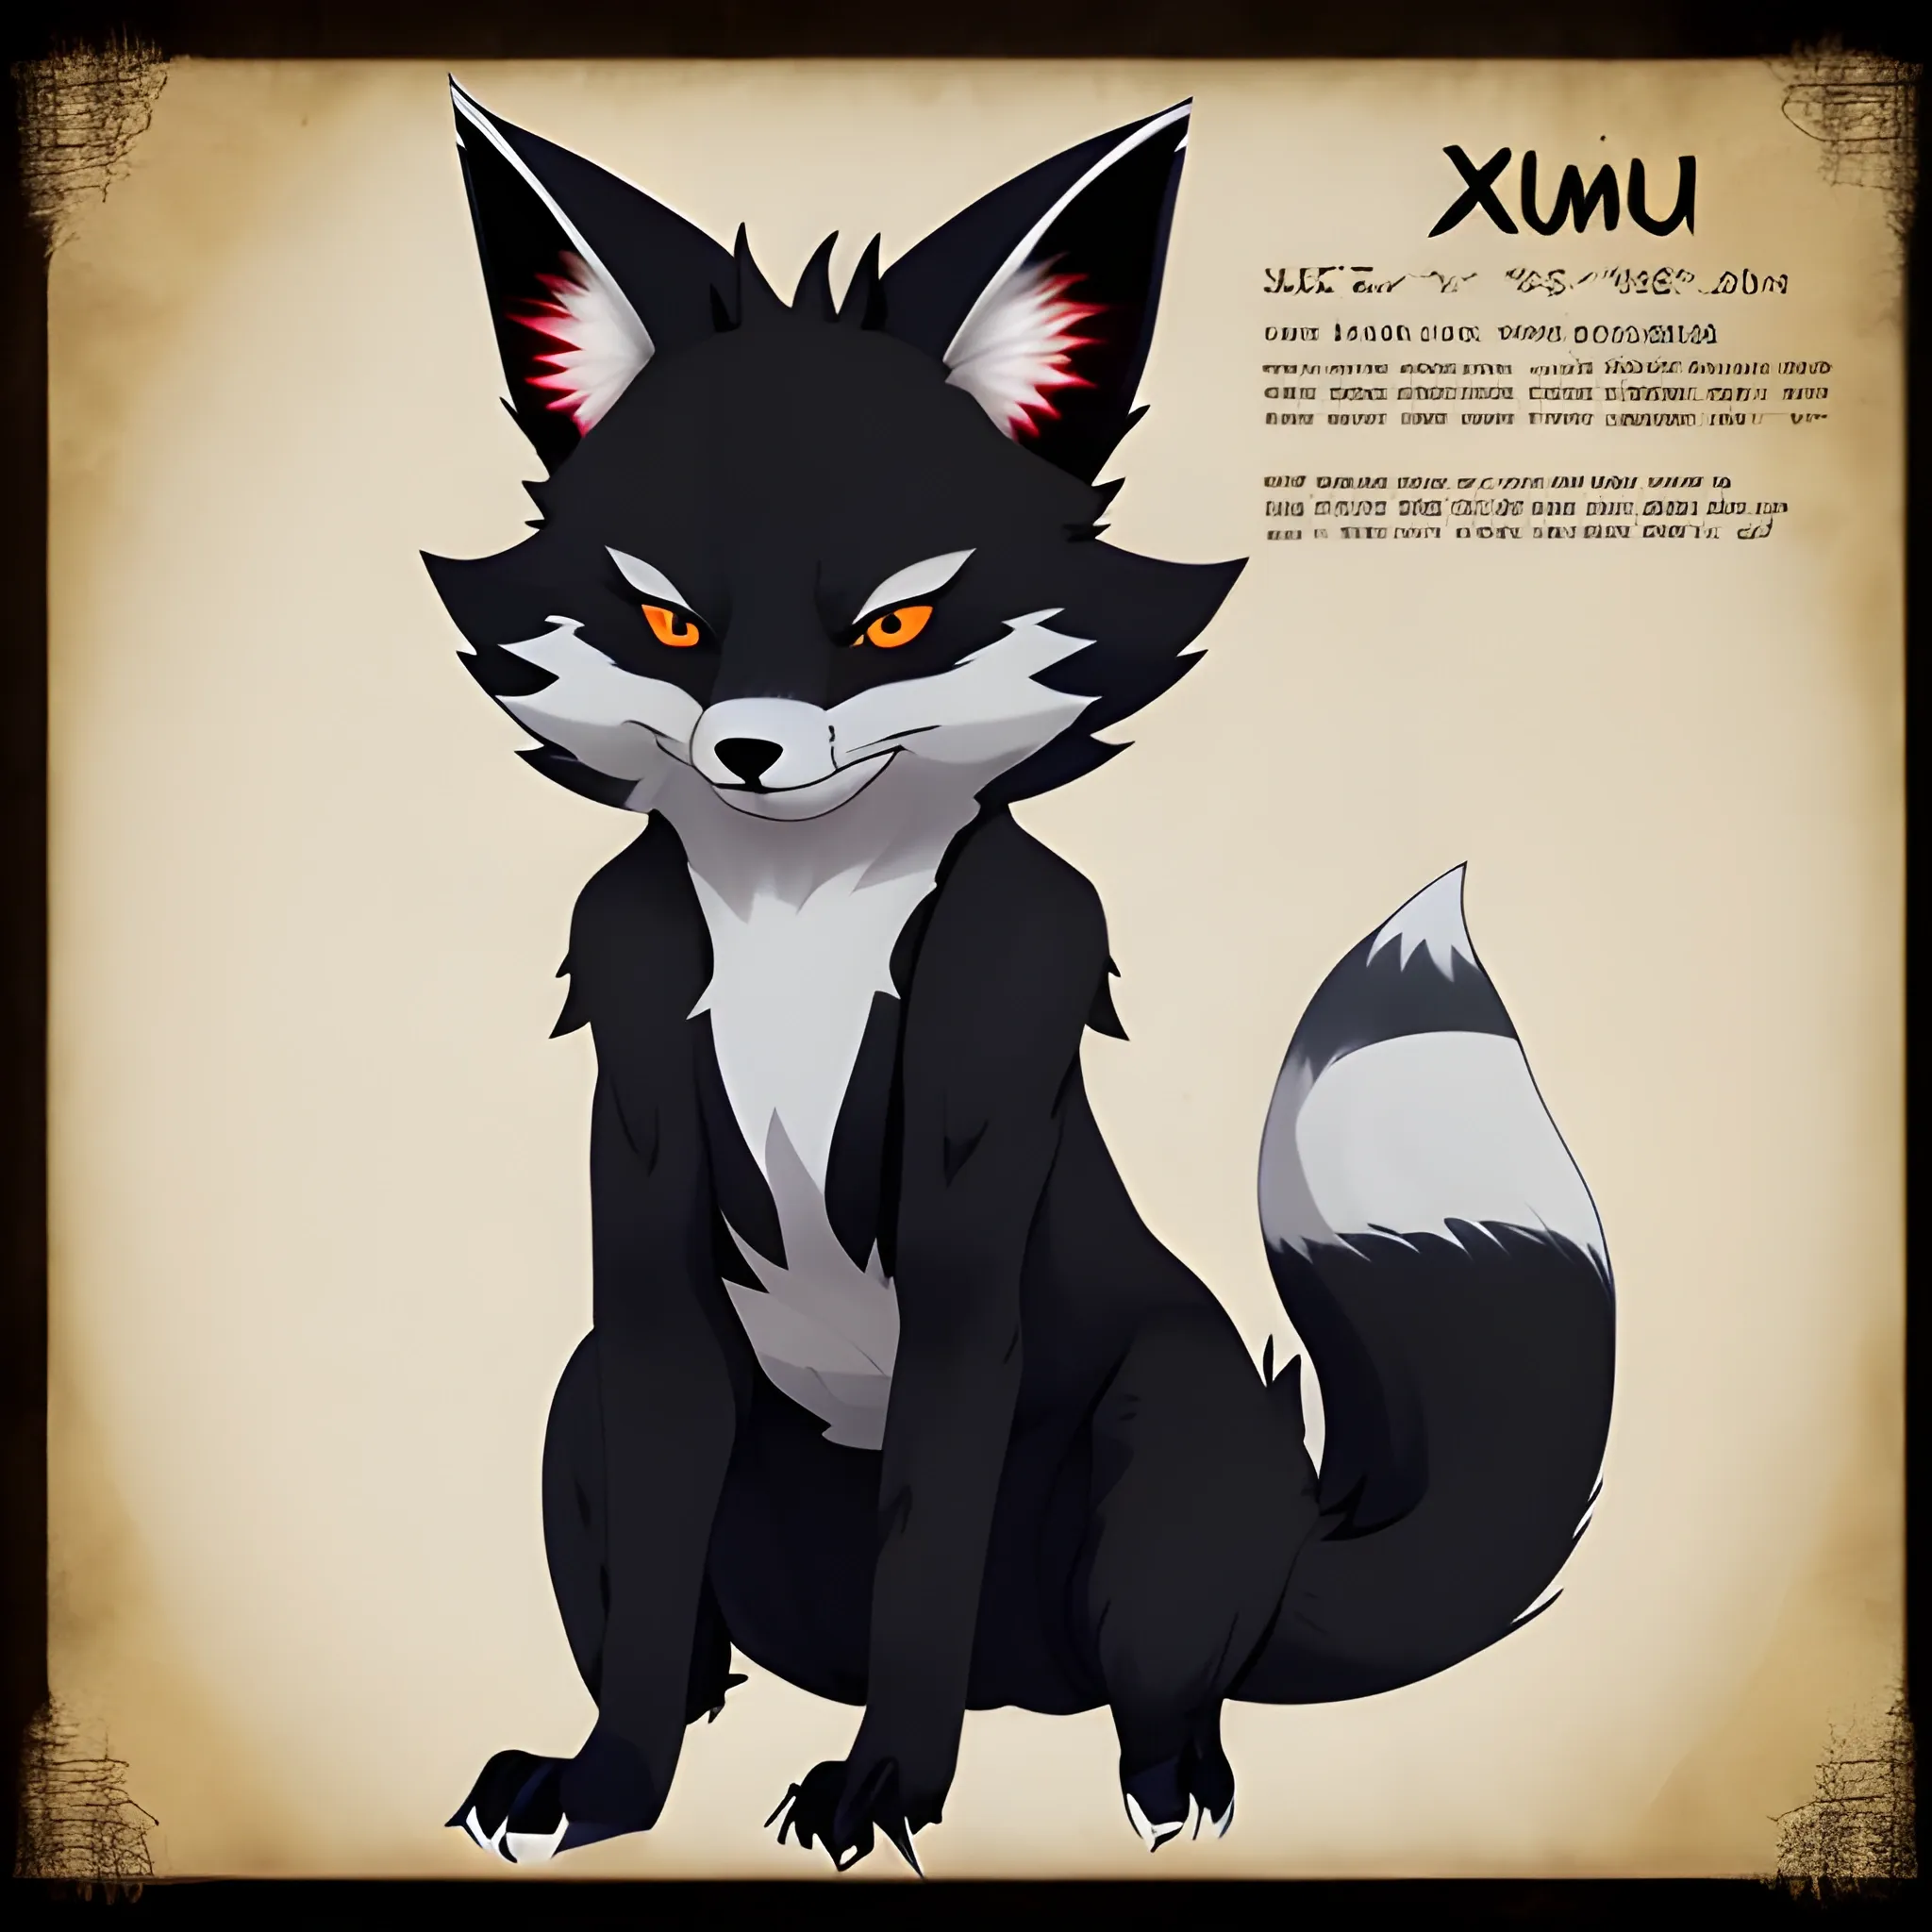 create a furry reference sheet , discription is "His names is xui and he’s a black 10 tailed kitsune with blue markings around his face